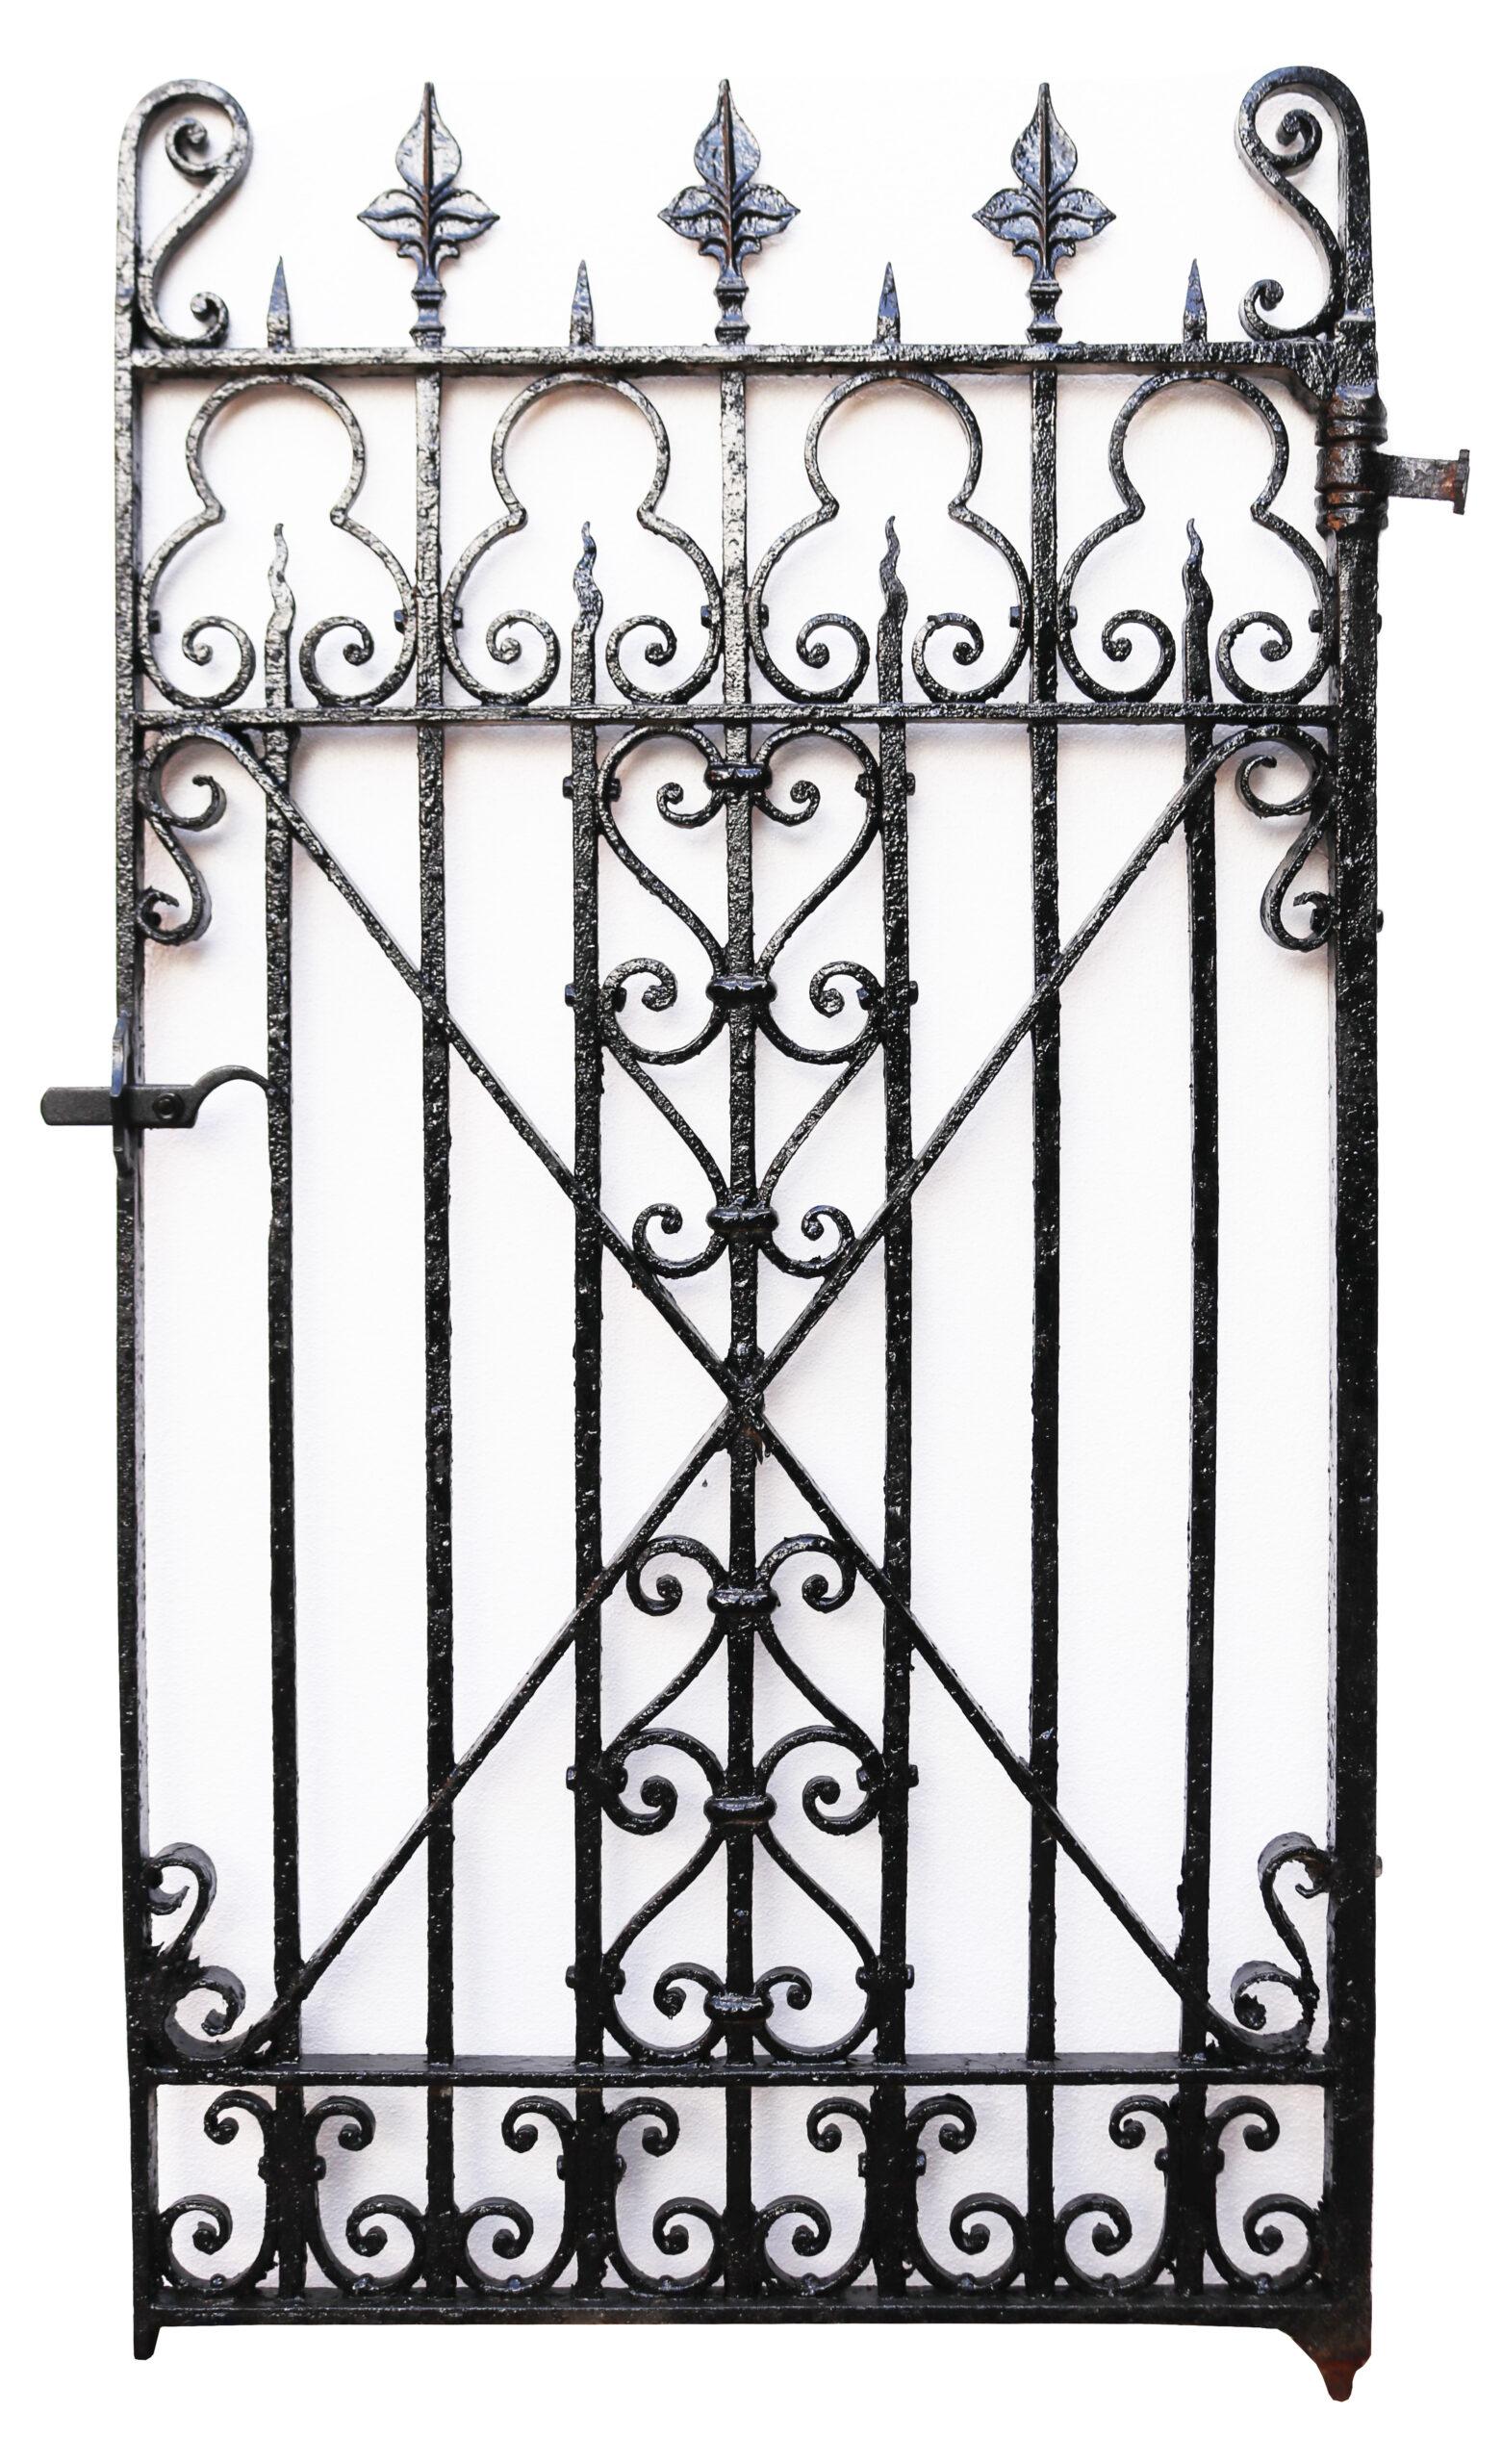 Antique wrought iron pedestrian gate. A late 19th century gate which beautifully demonstrates the skills of victorian blacksmithing. Scrolling design with floral finials adding to its grand appearance.

Additional Dimensions

For an opening of